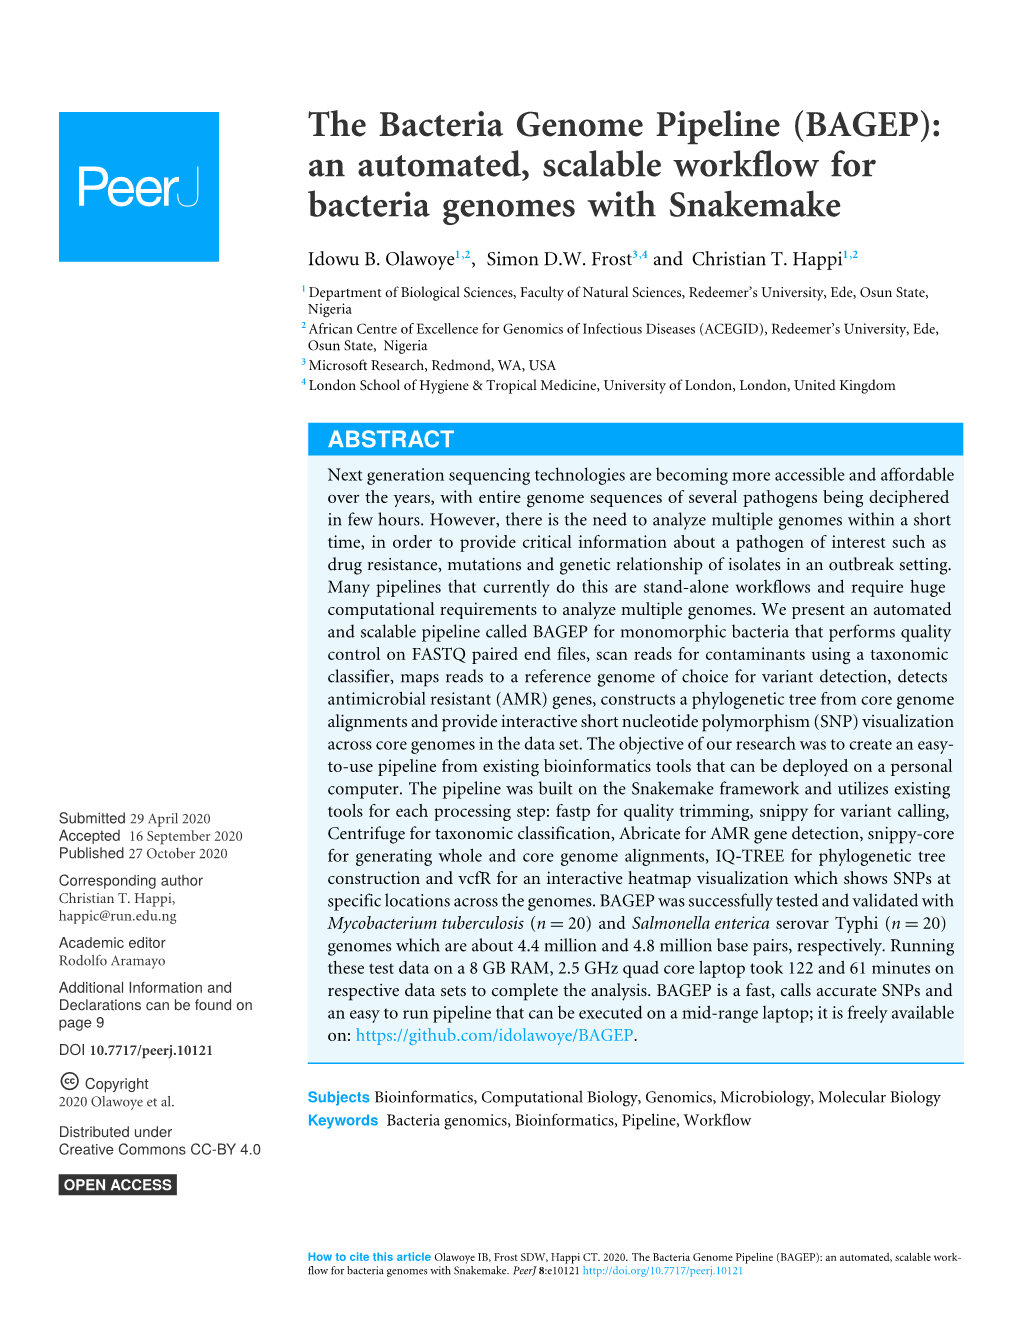 The Bacteria Genome Pipeline (BAGEP): an Automated, Scalable Workflow for Bacteria Genomes with Snakemake